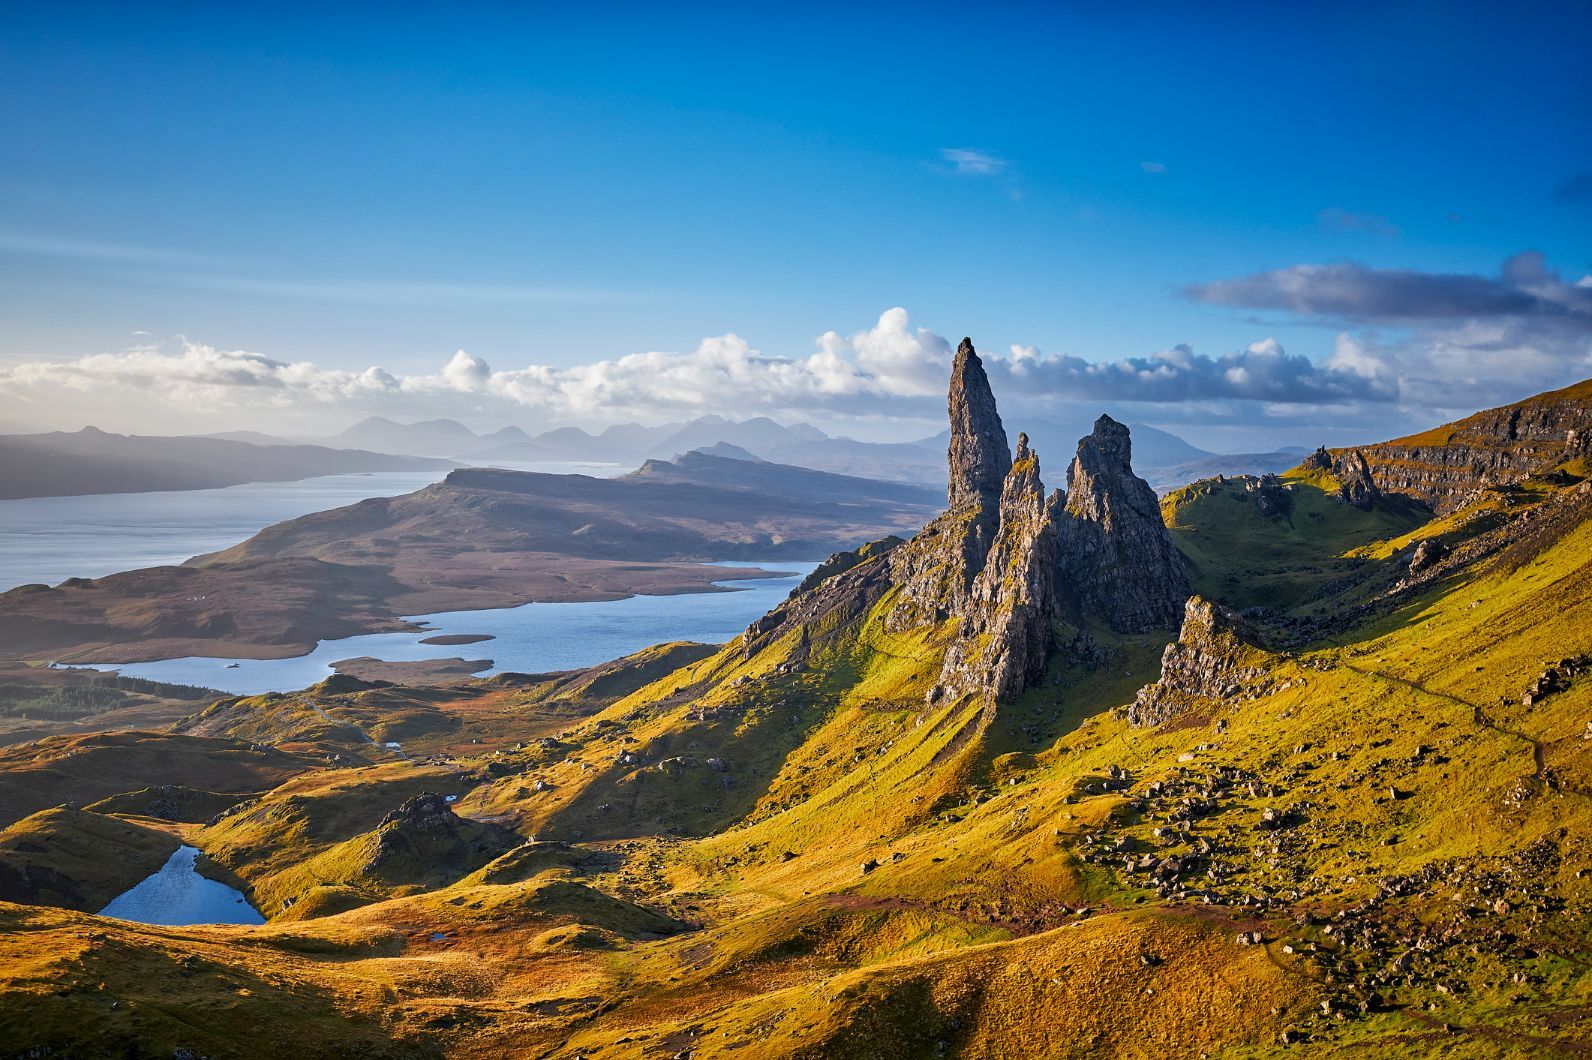 The Old Man of Storr, a popular hiking spot on the Isle of Skye off the west coast of Scotland. Photo: Getty